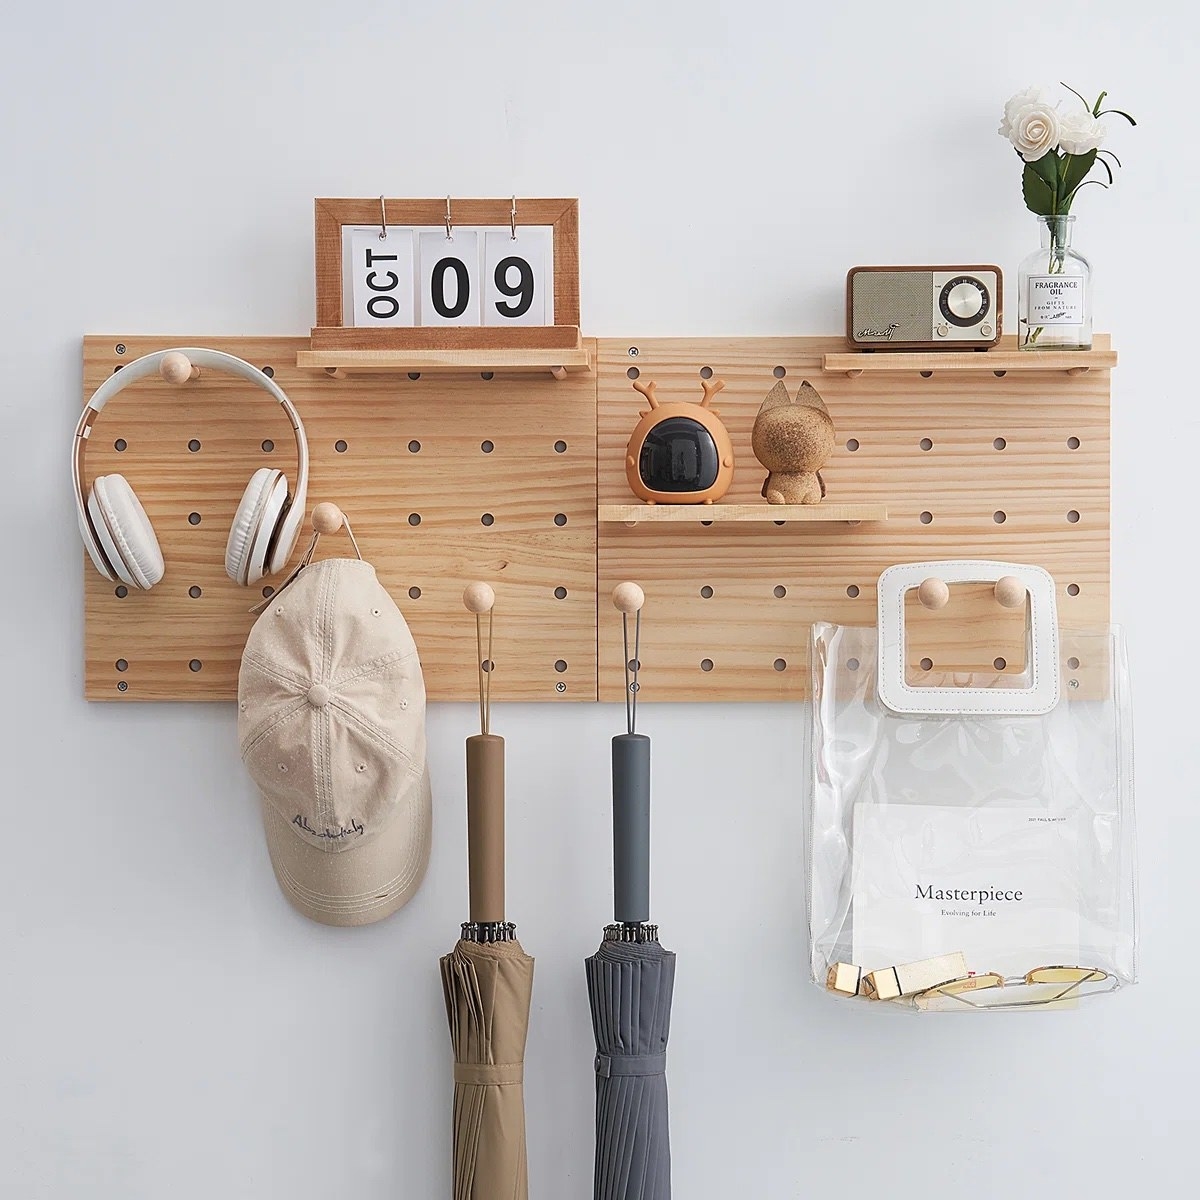 a wooden peg board holding hats, umbrellas, white headphones, and knickknacks against a white wall